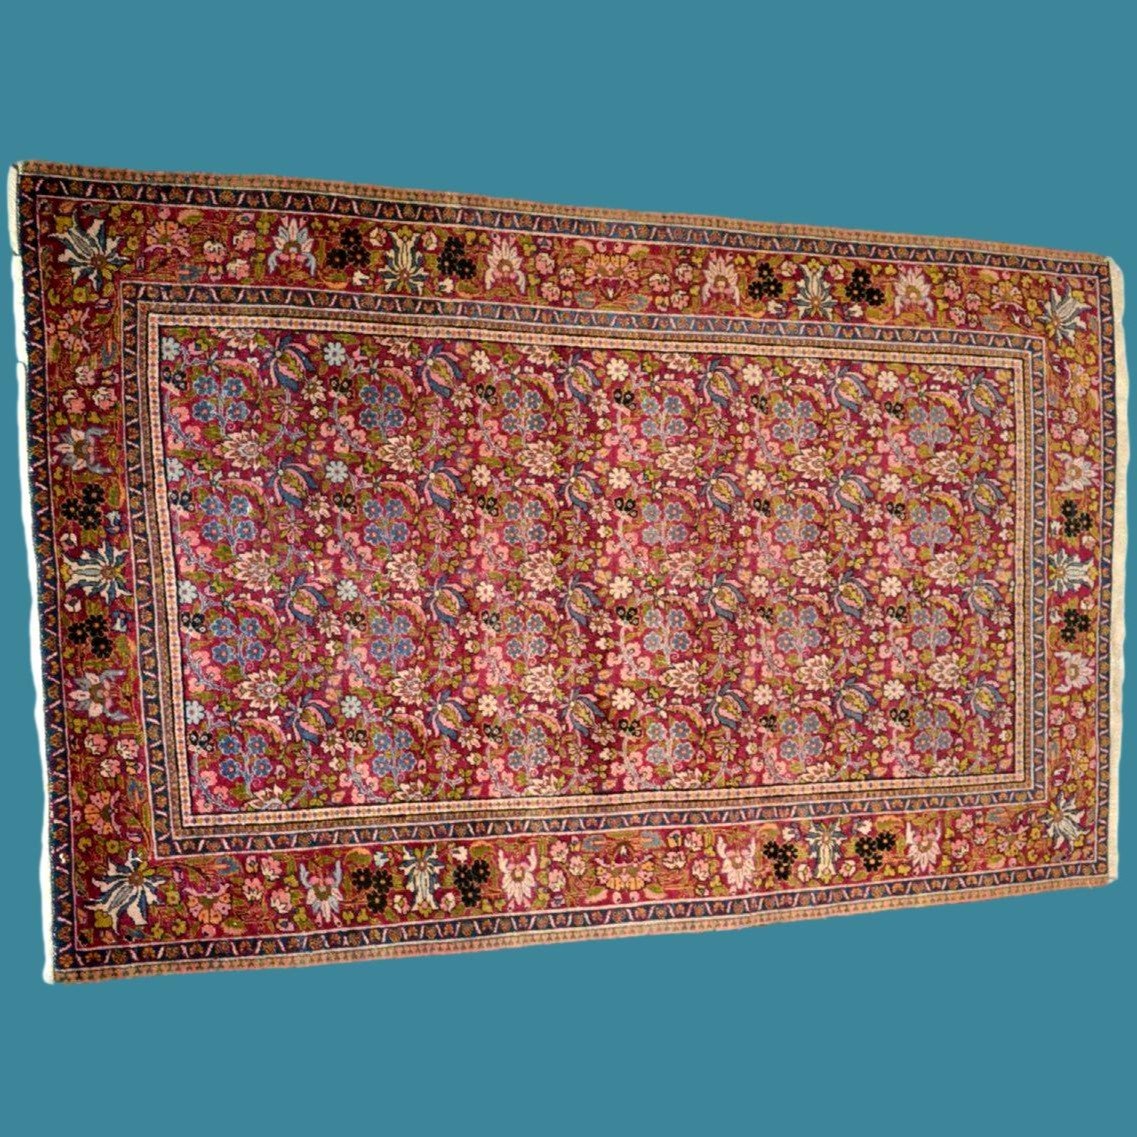 Old Floral Kirman, 139 X 216 Cm, Hand-knotted Wool In Persia, Iran, Late 19th And Early 20th Centuries-photo-2